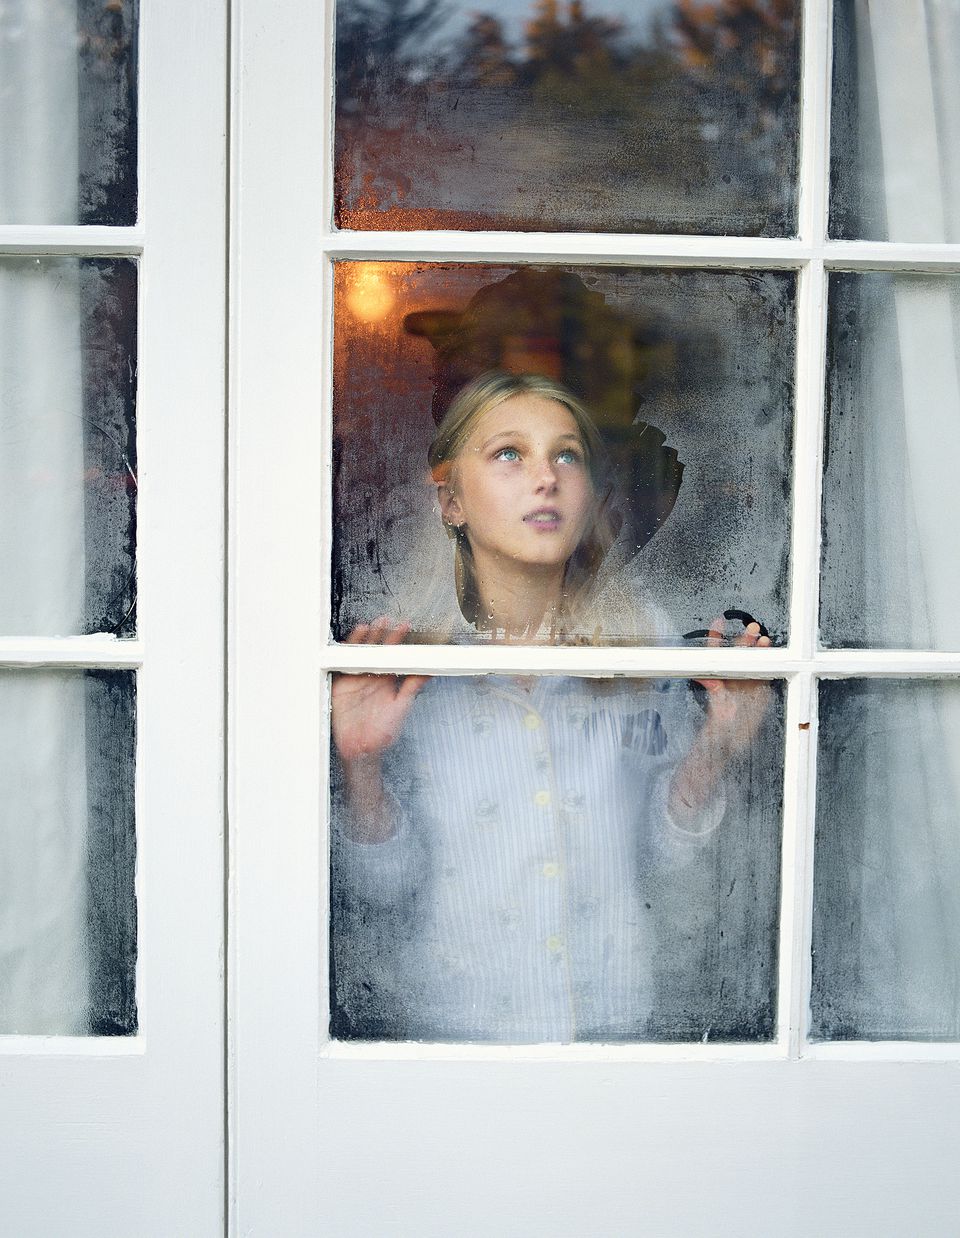 Girl-looking-out-window-GettyImages-200148753-001-586eca985f9b584db3e2c756.jpg